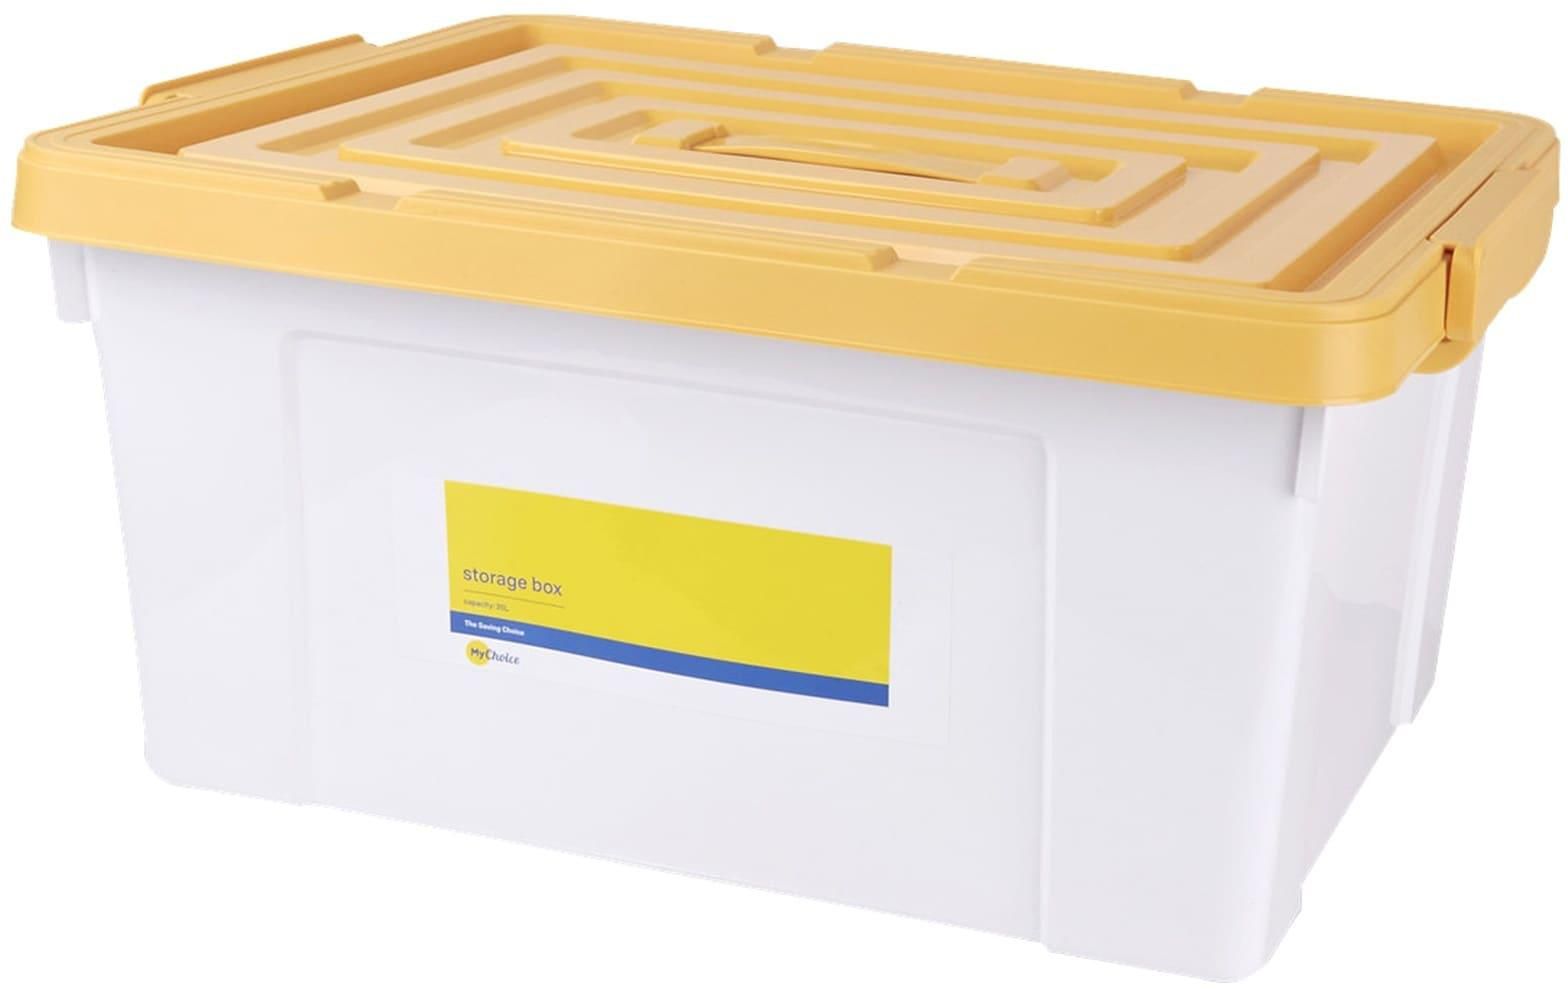 MyChoice Storage Box With Cover White And Yellow 35L